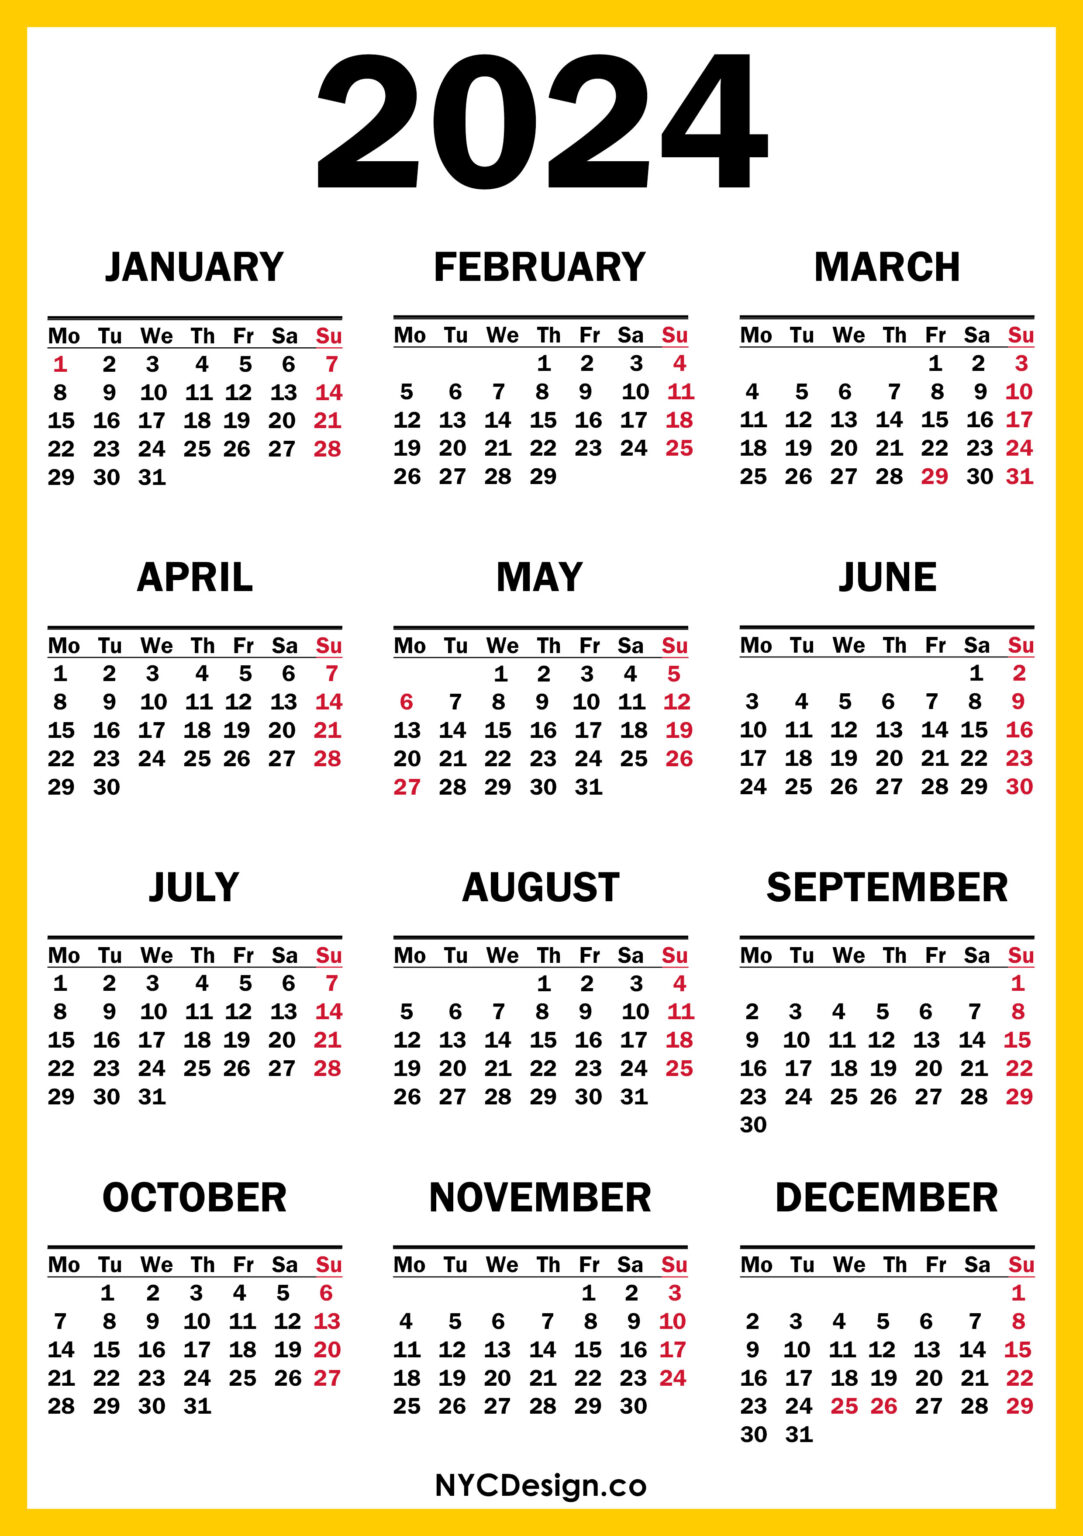 2024 calendar templates and images printable 2024 calendar with us